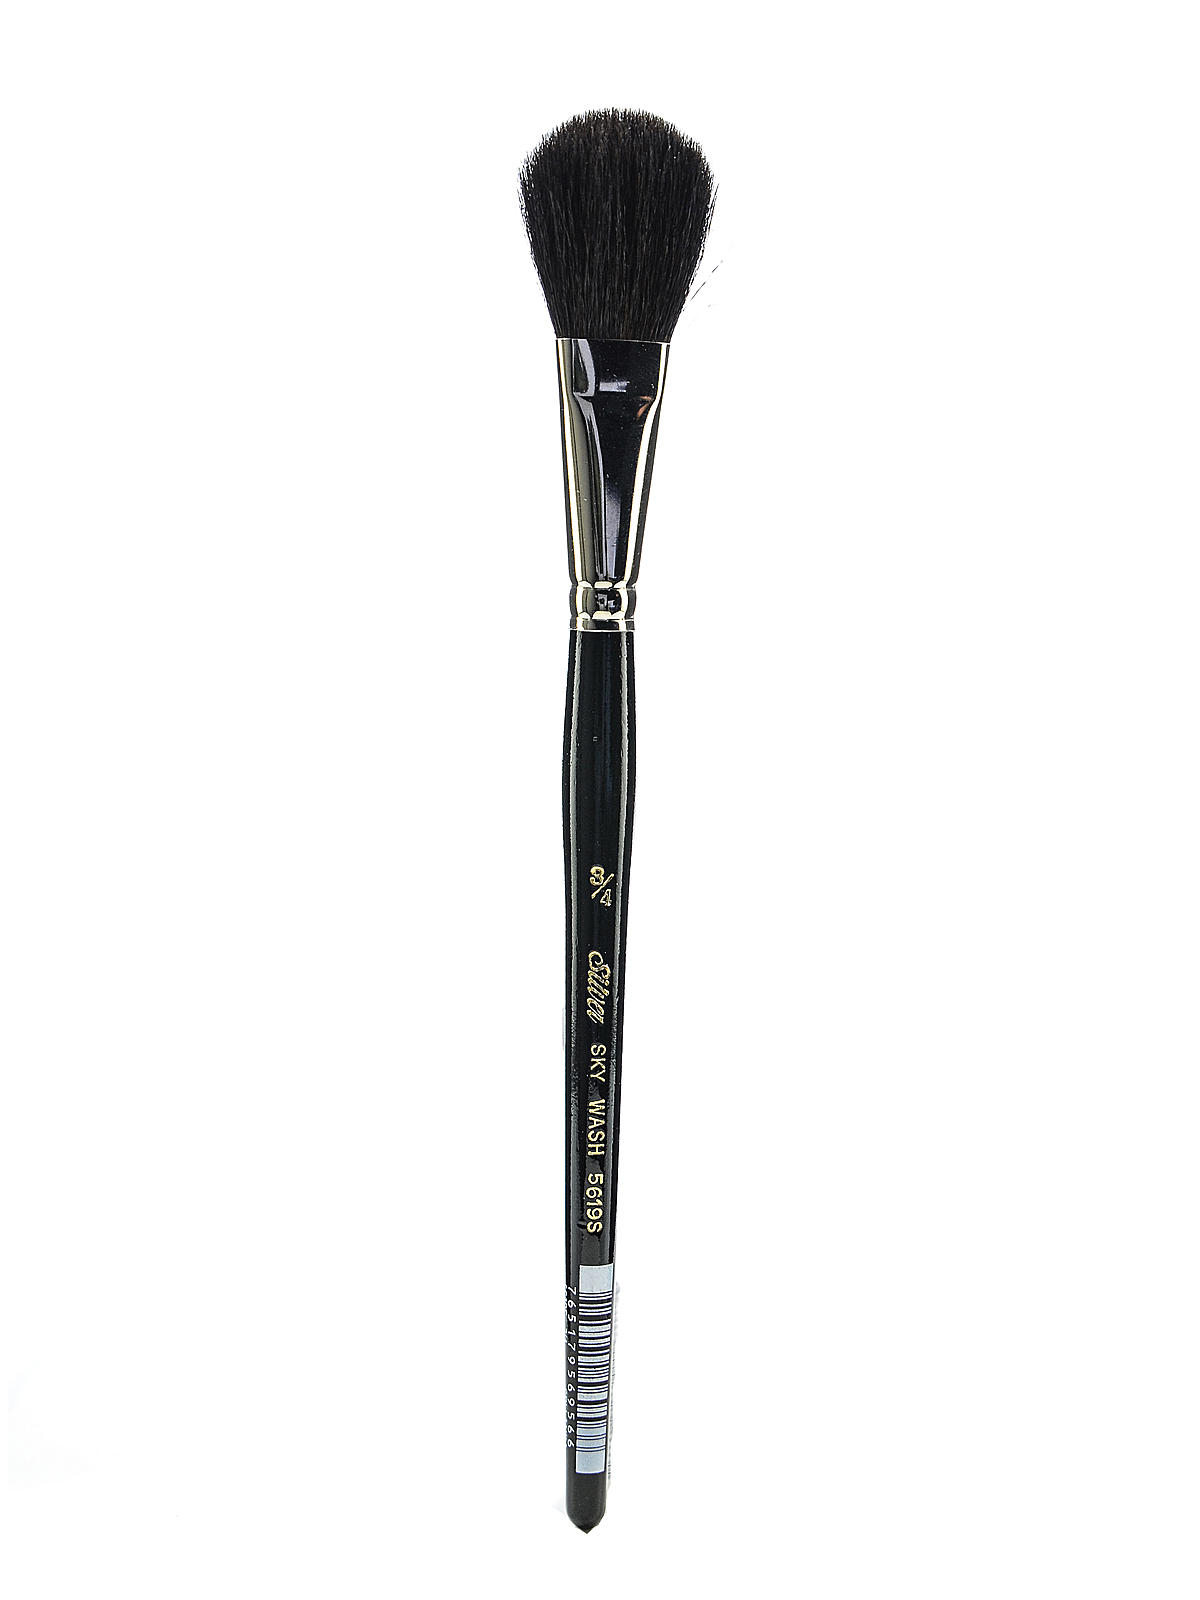 Black Round Oval Mop Brushes 3 4 In. Oval Mop 5619